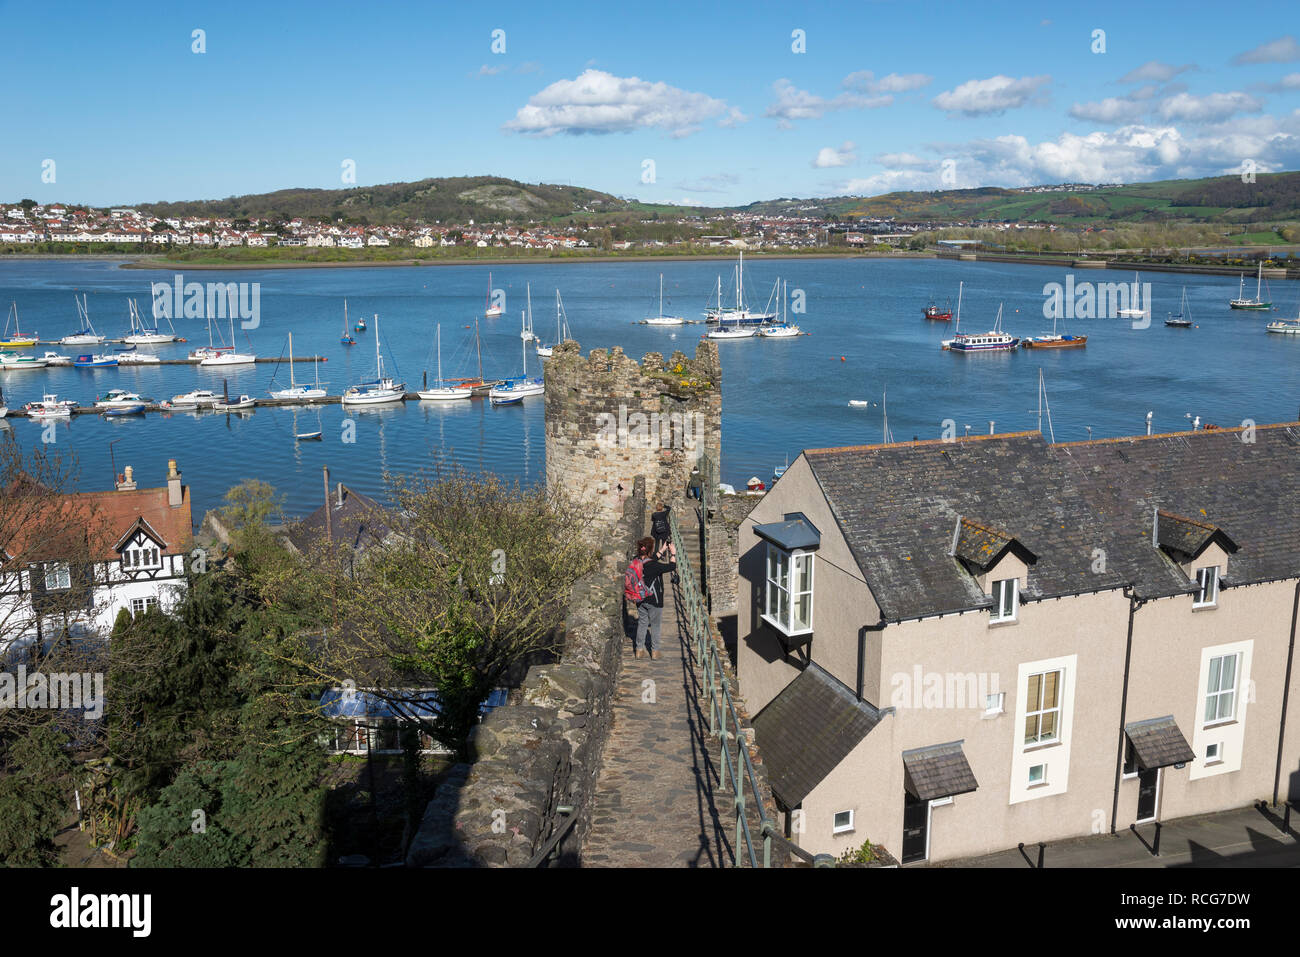 Old town walls at Conwy, North Wales. View of boats in the river near the harbour. Deganwy on the opposite side. Stock Photo